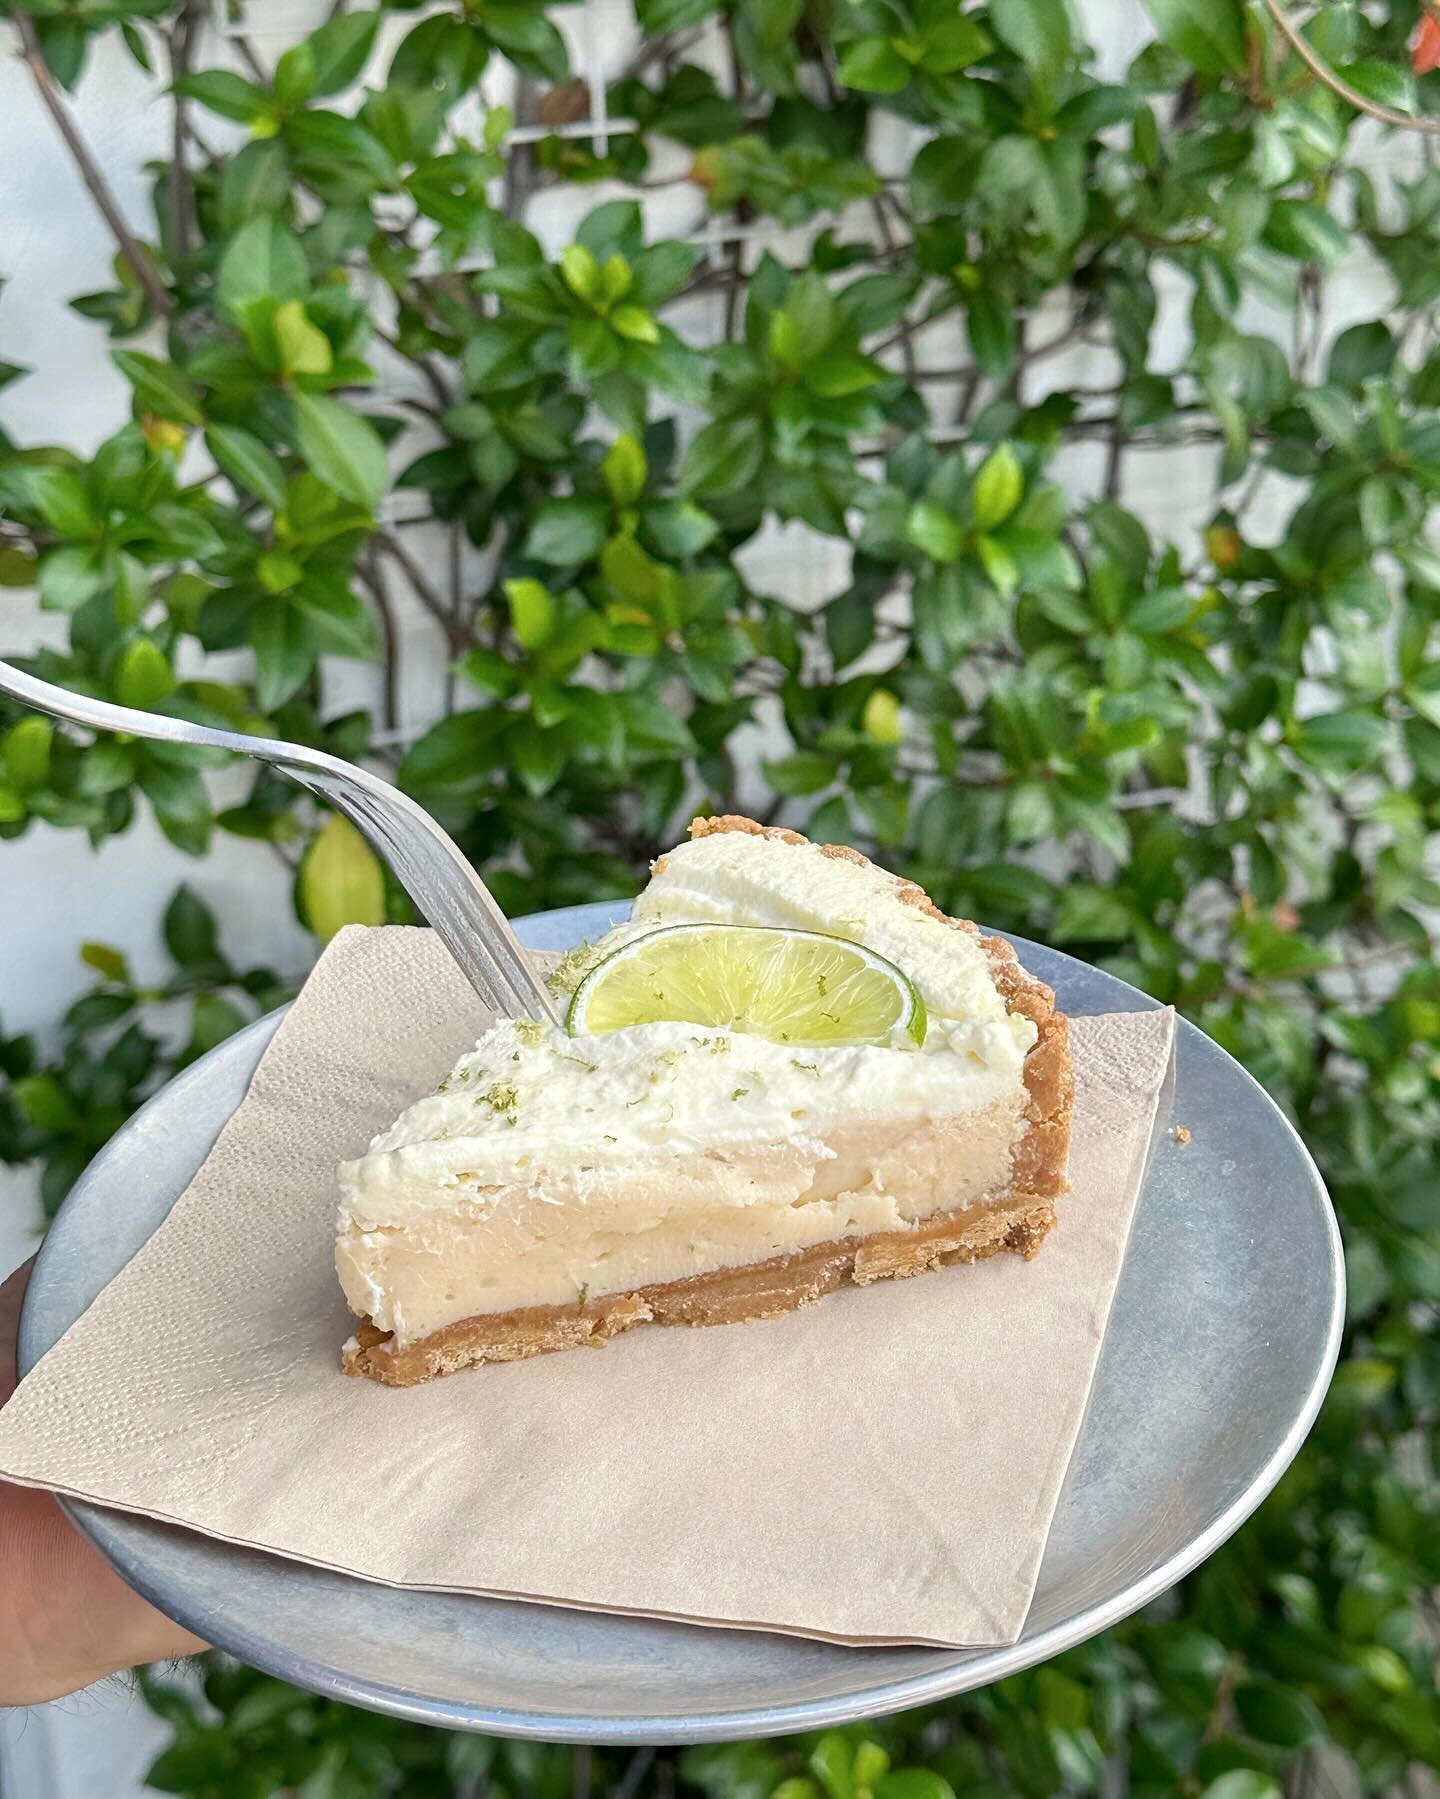 Gluten free key lime pie in our cabinet baked in house by Erin 👀🤌🏼 available until sold out! 

Weekdays from 6am-2pm
Weekends from 7am-2pm

📍37 Currumbin Creek Road, Currumbin Waters, QLD